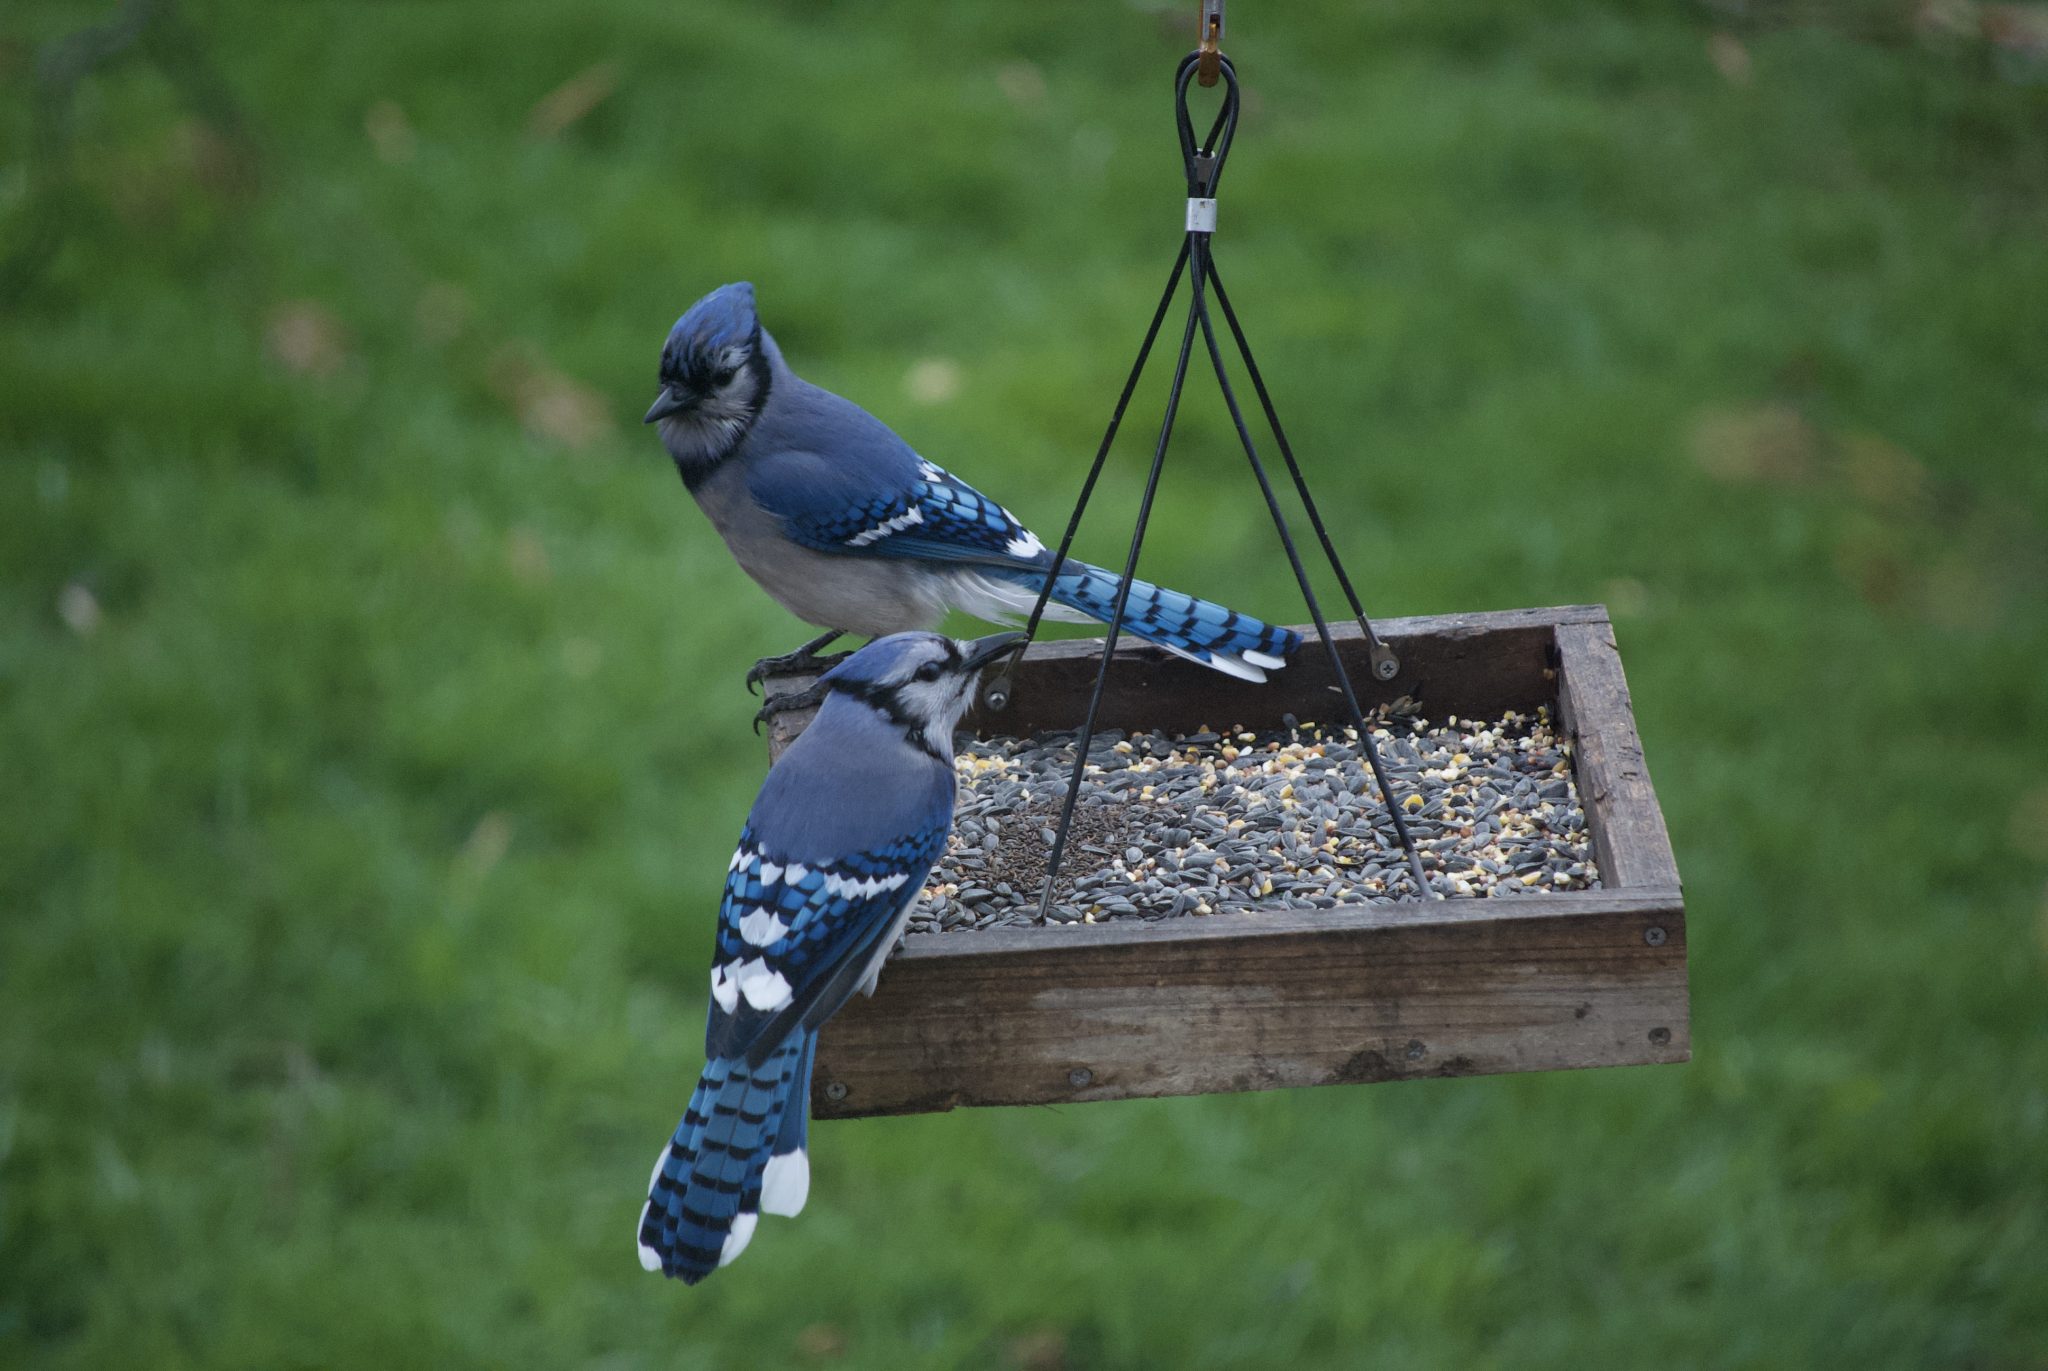 Two blue jays share a meal on a platform feeder.